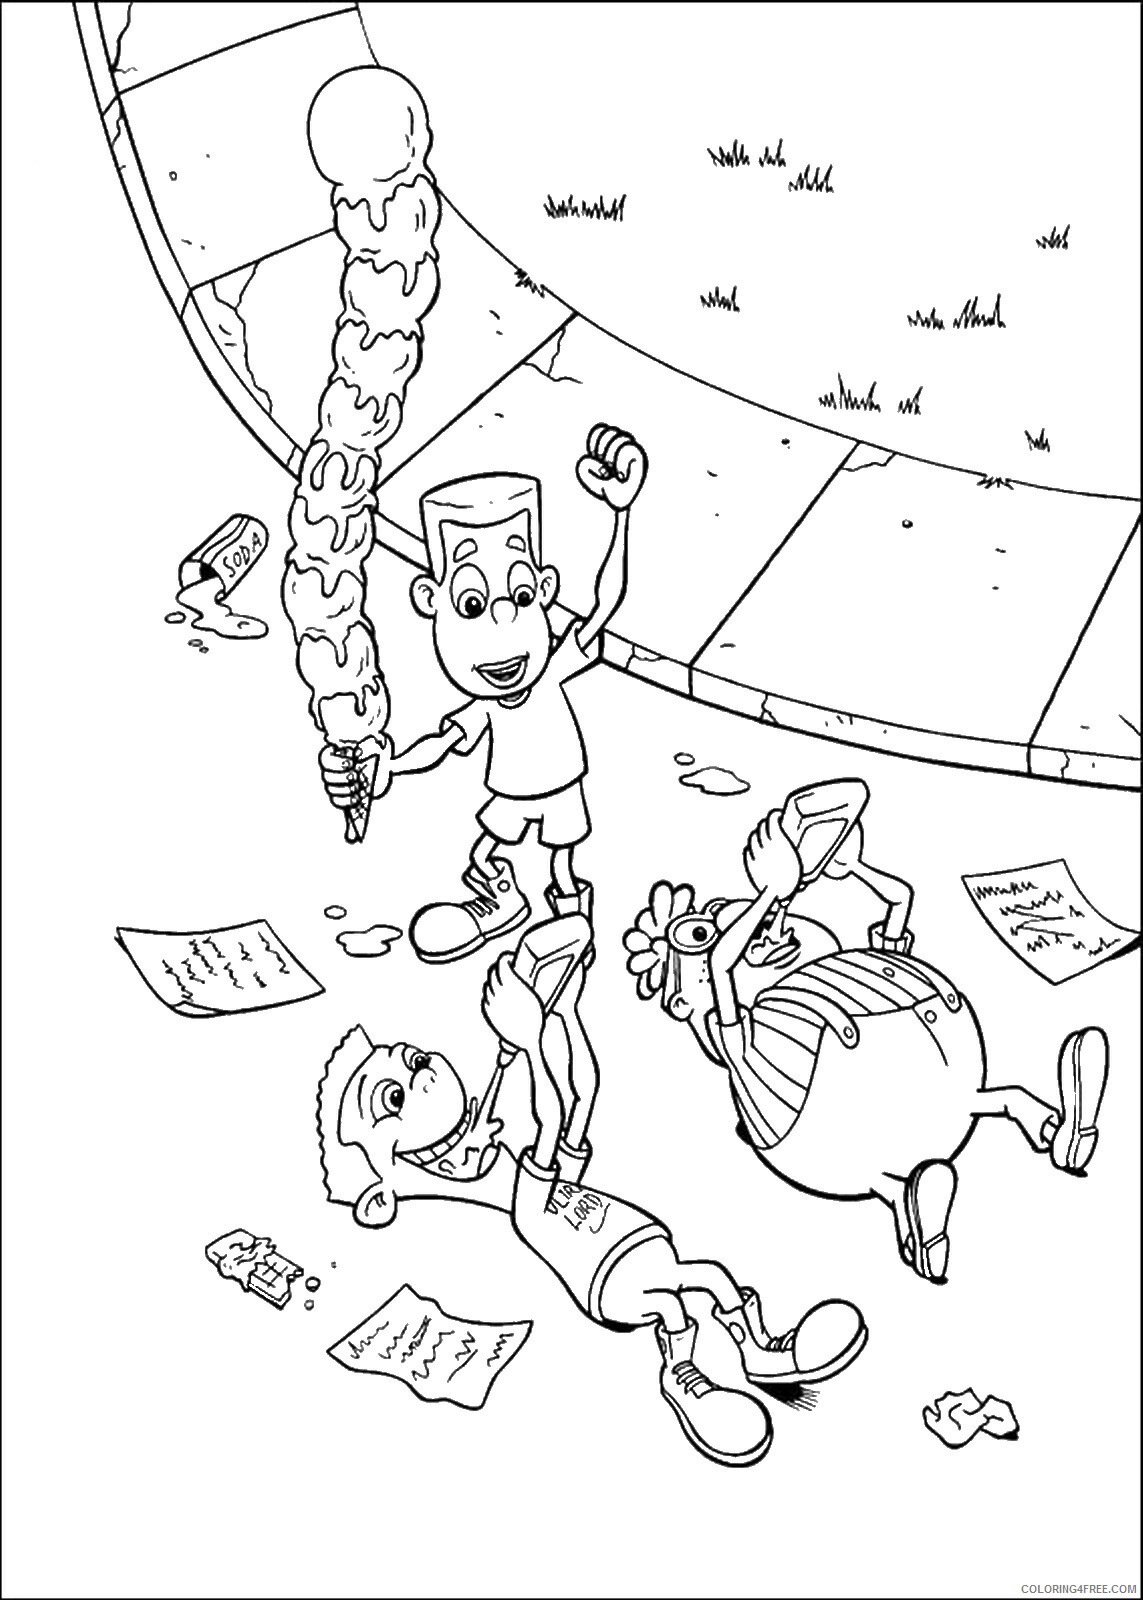 Jimmy Neutron Coloring Pages TV Film jimmy_neutron_cl11 Printable 2020 04129 Coloring4free